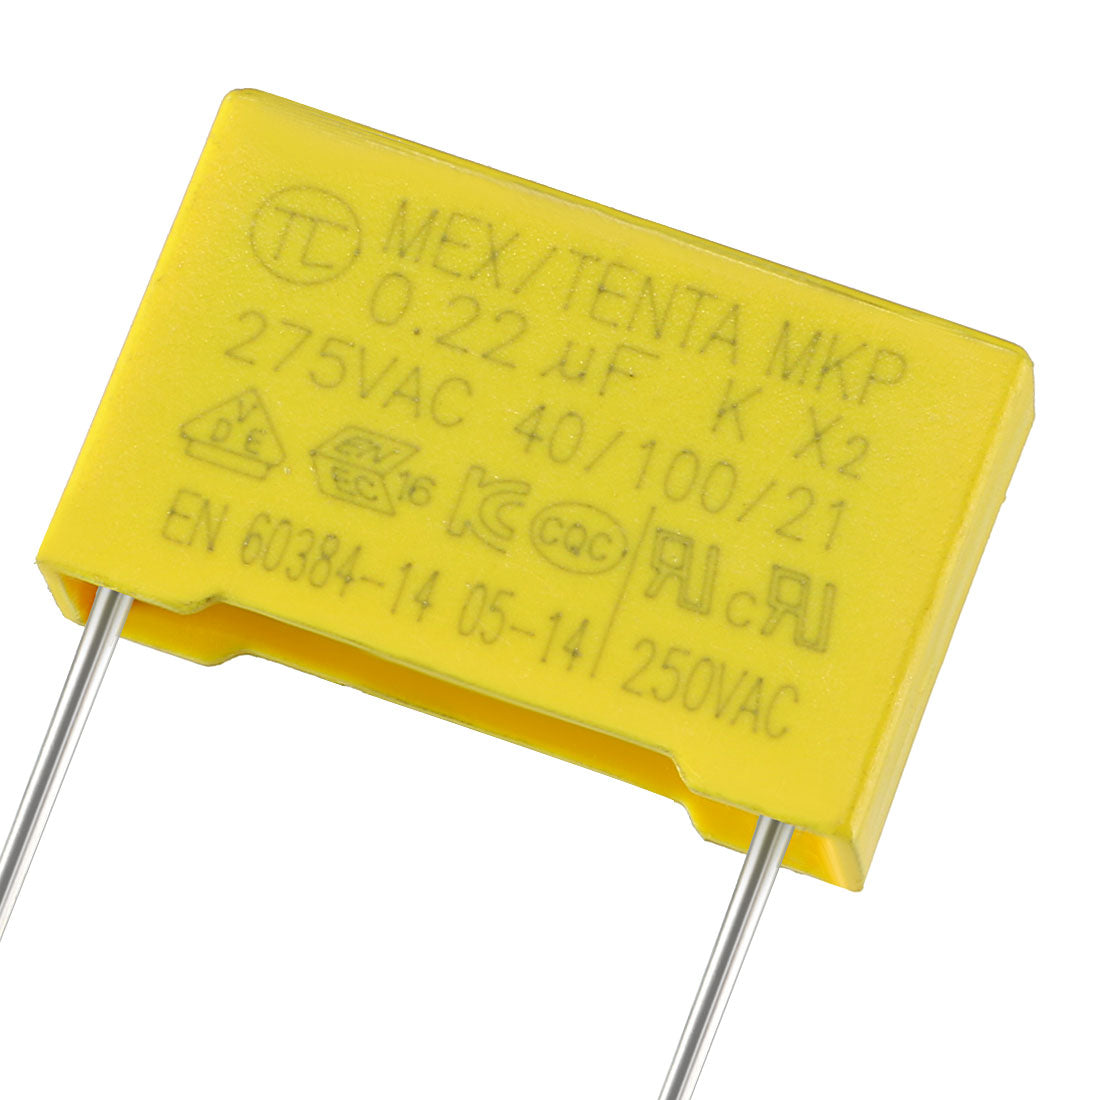 uxcell Uxcell Safety Capacitors Polypropylene Film 0.22uF 275VAC X2 MKP 21mm Pin Pitch 5 Pcs